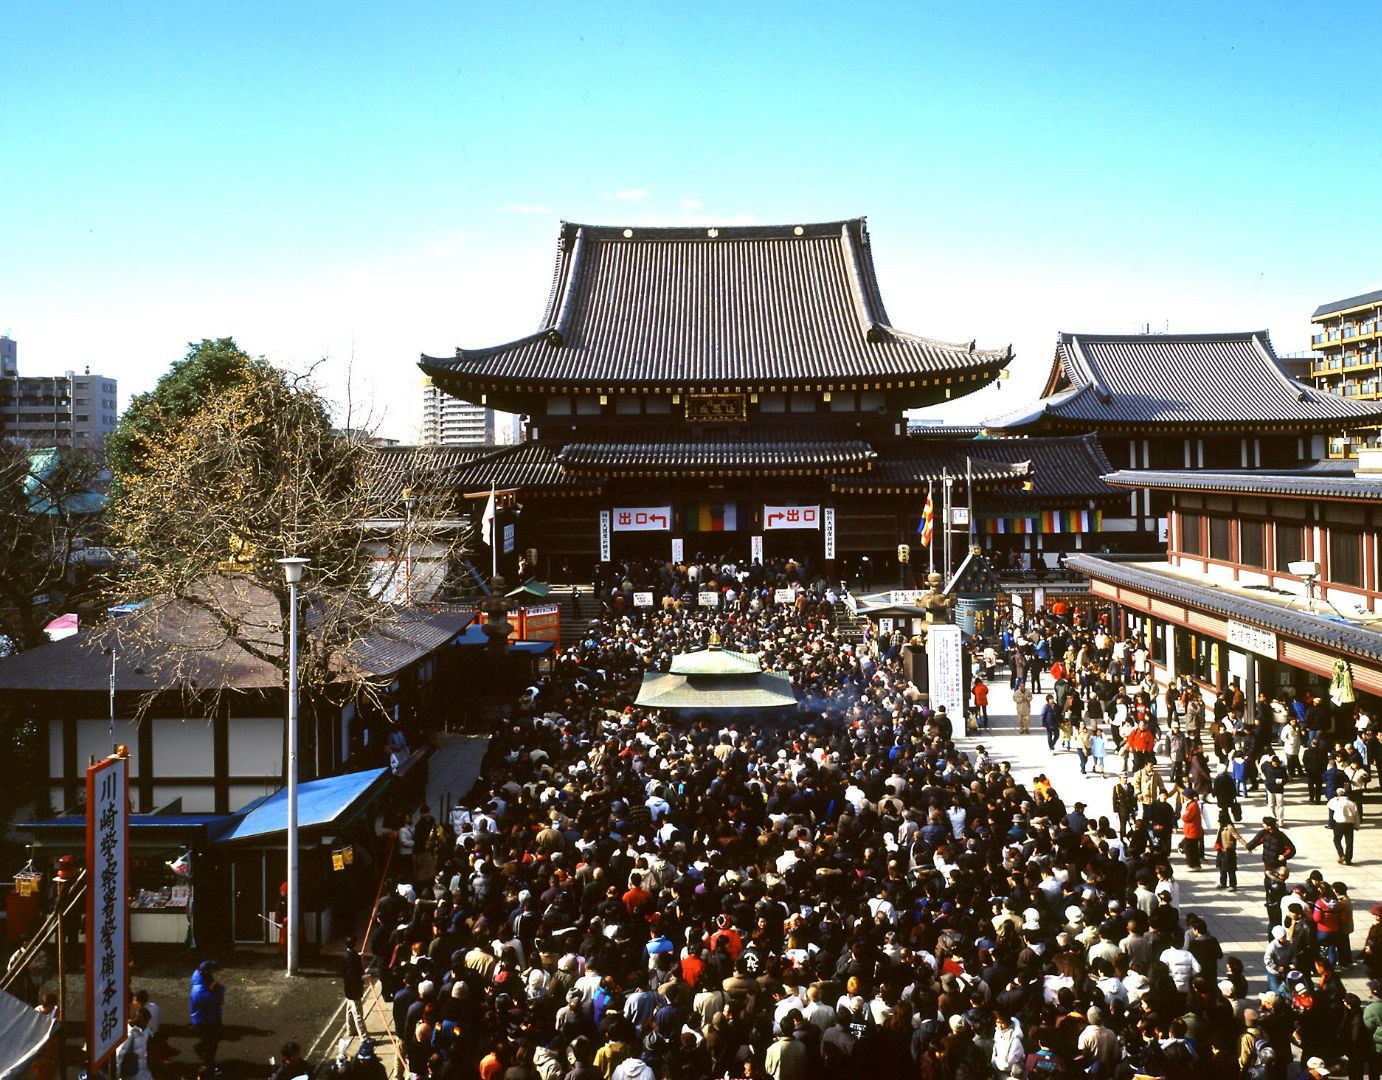 Many people crowded around a shrine in Japan